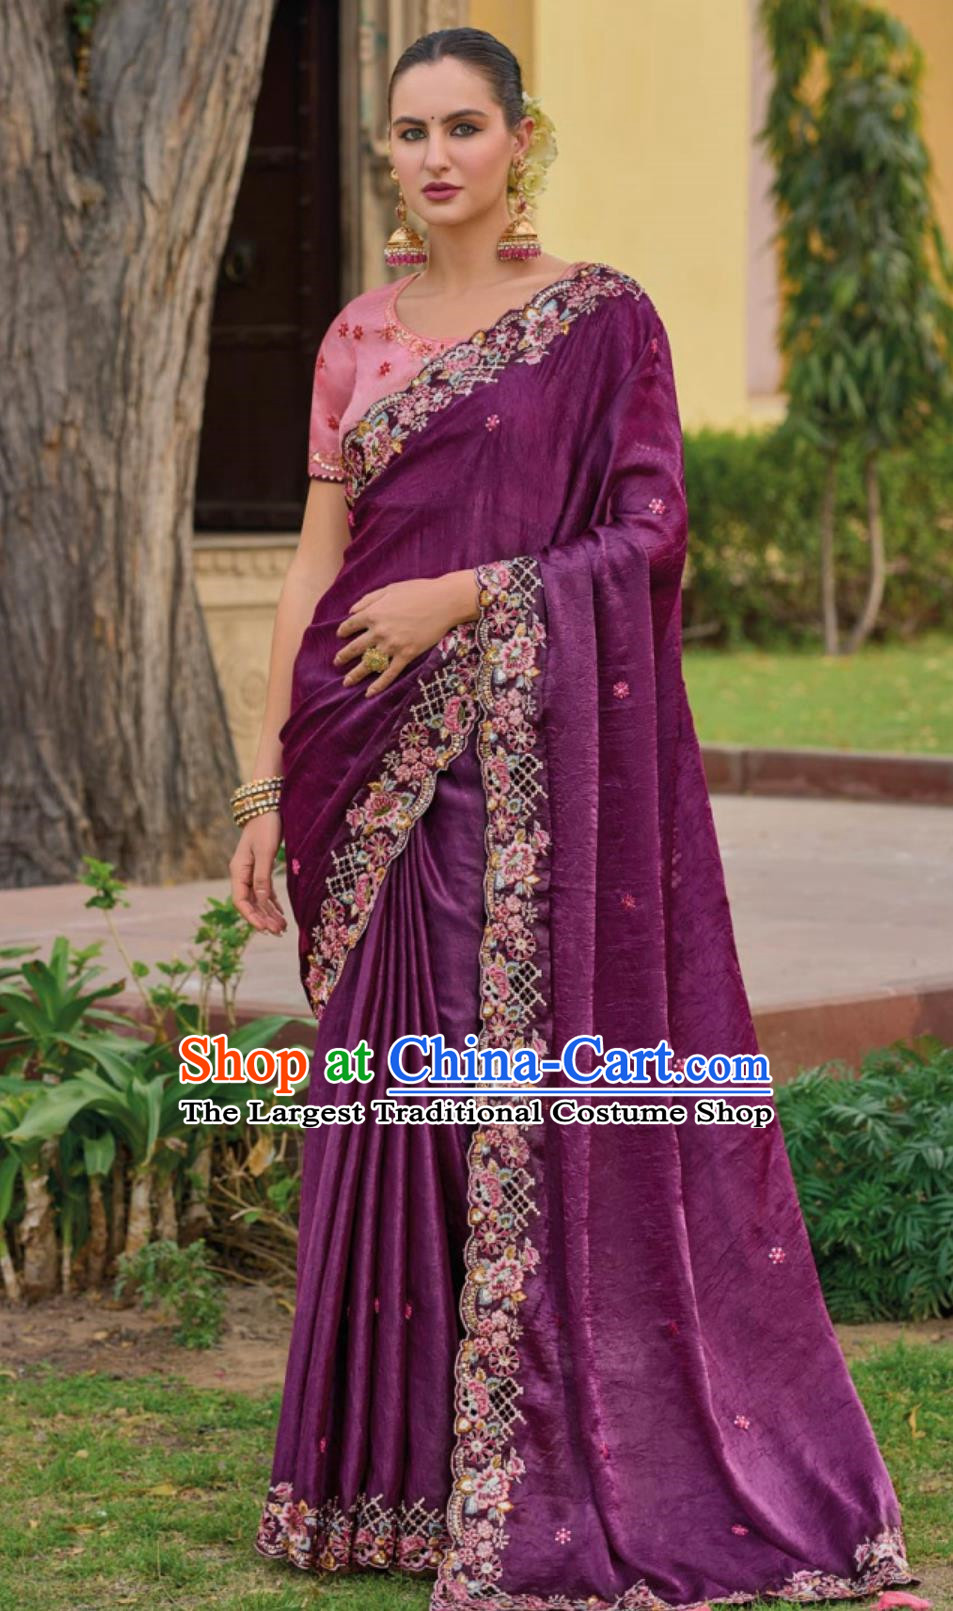 Indian Women Embroidered Purple Sari Dress India National Clothing Traditional Festival Fashion